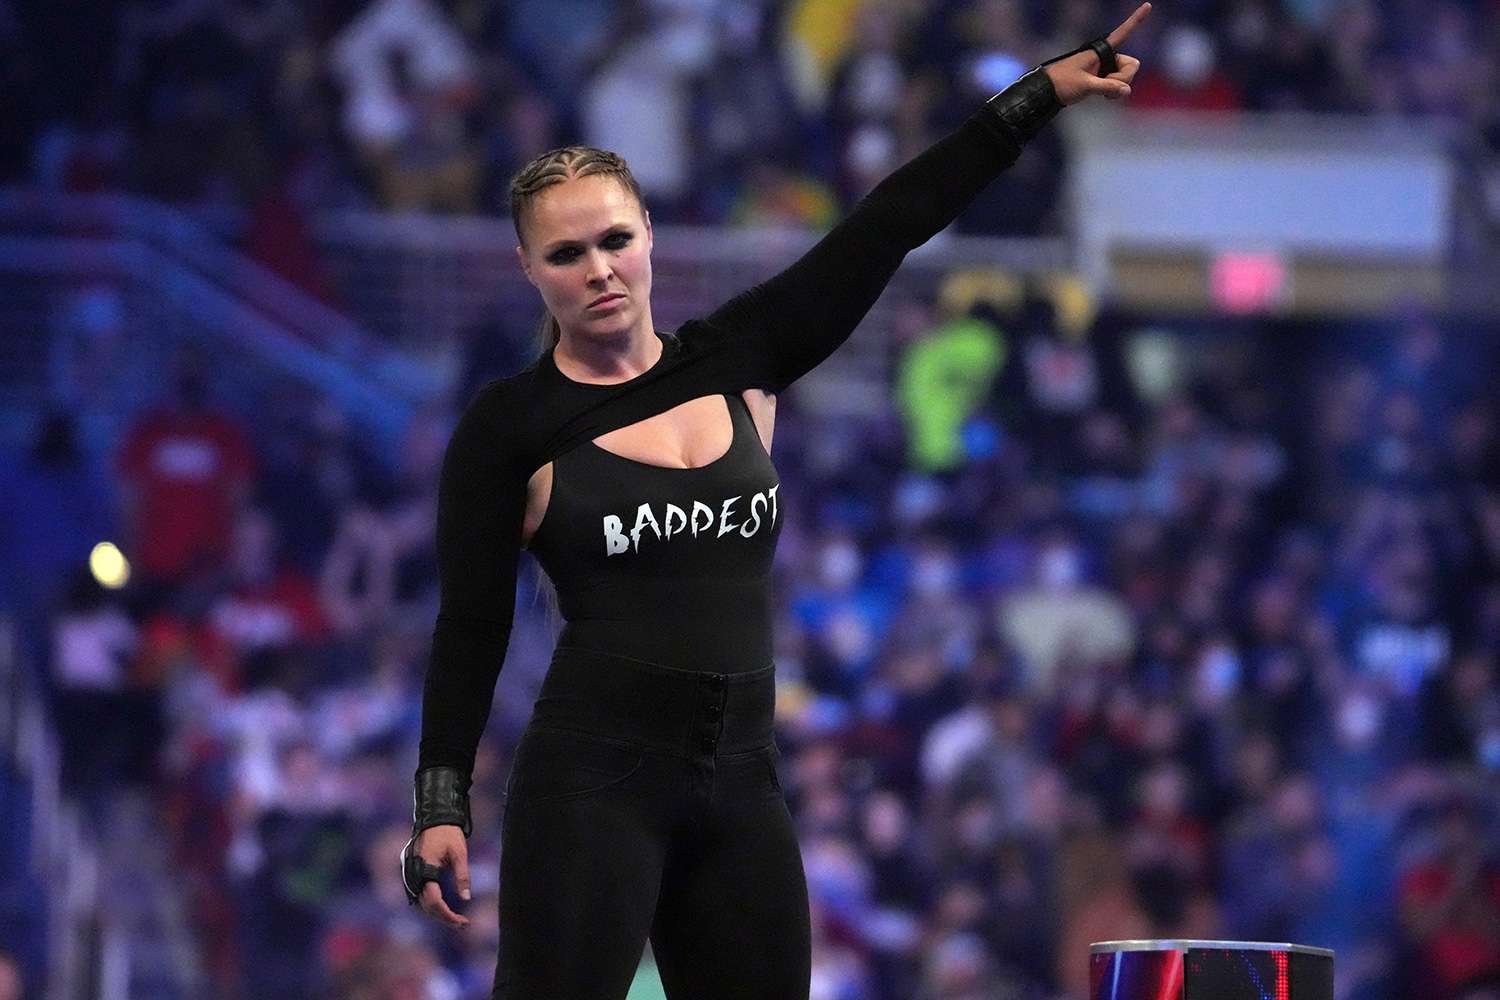 Ronda Rousey celebrates after winning the women’s Royal Rumble match during the Royal Rumble at The Dome at America's Center